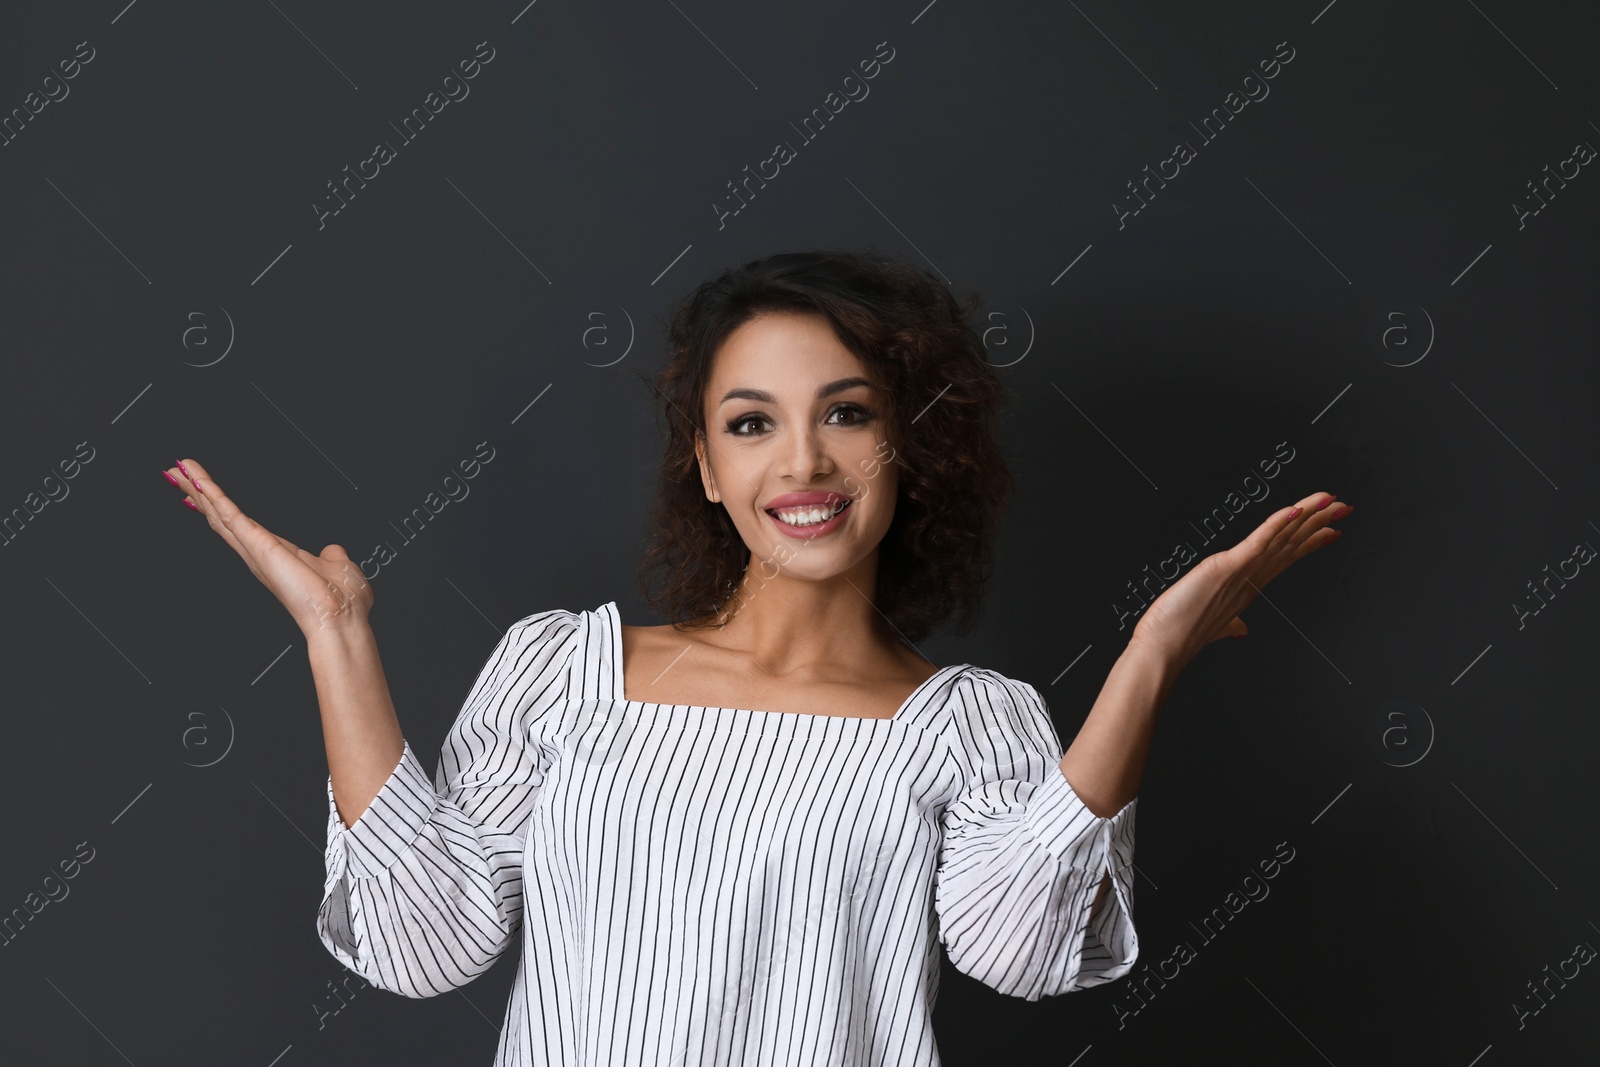 Photo of Emotional woman in casual outfit on black background